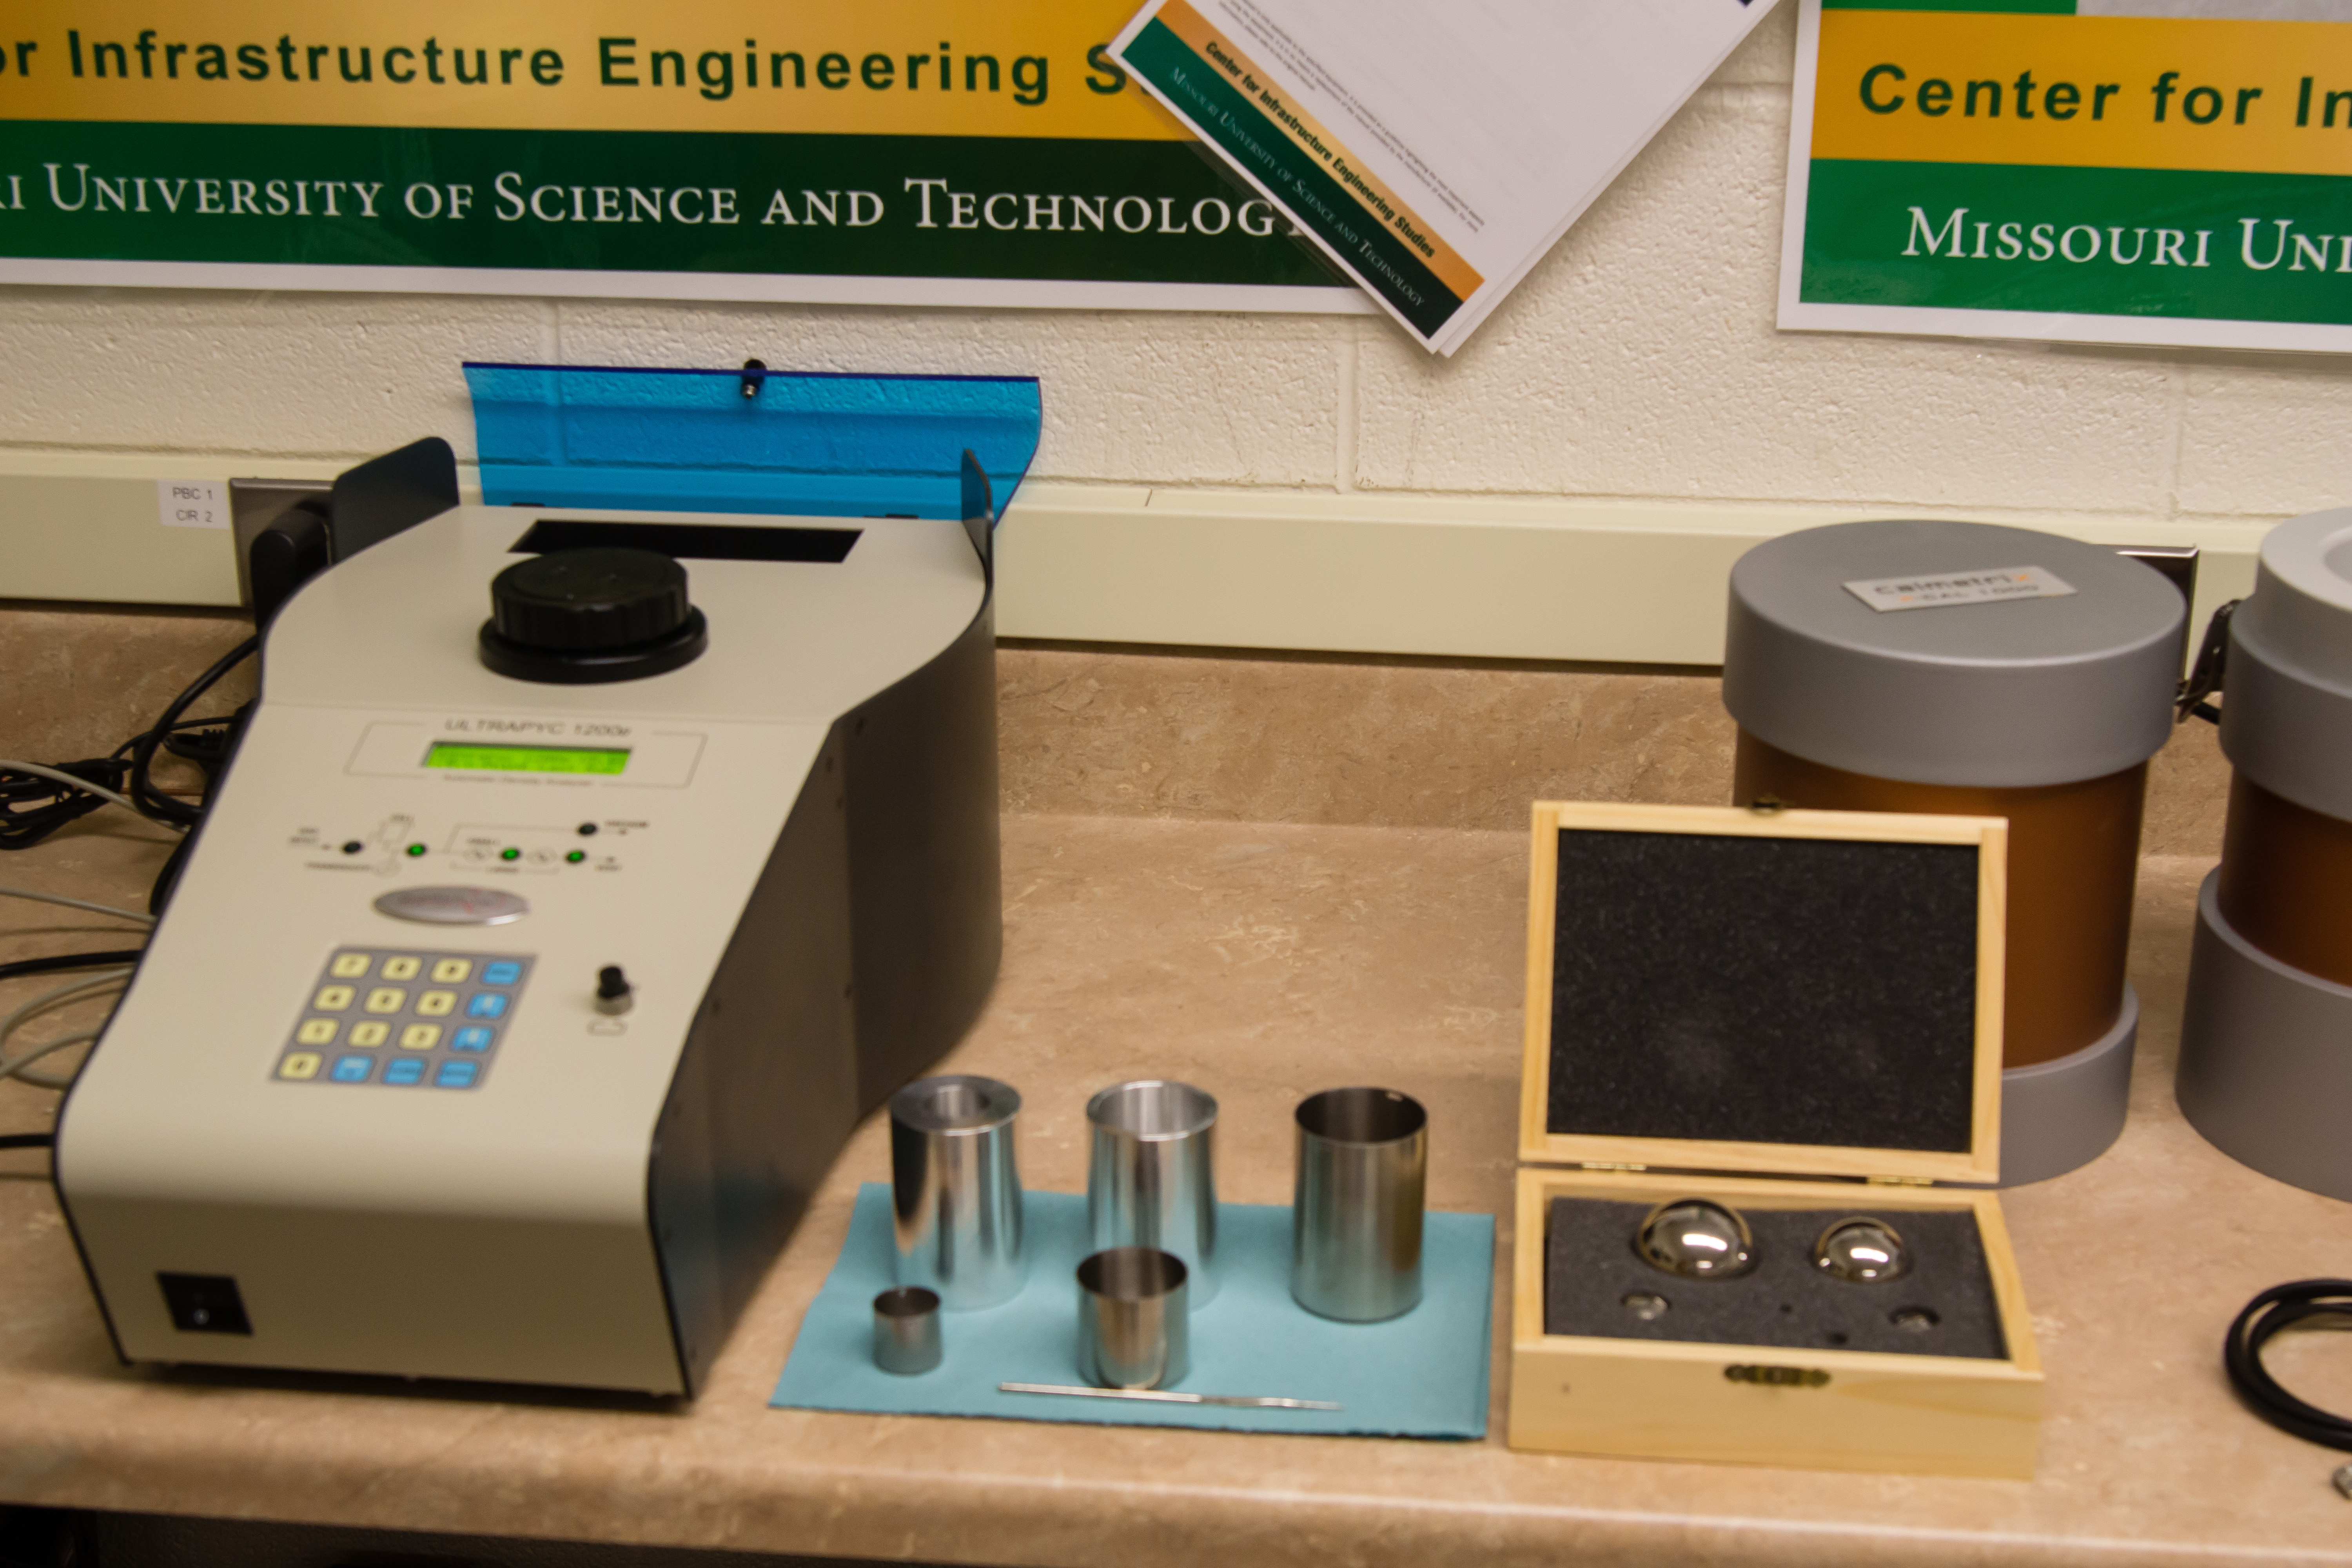 This equipment is used to determine true density and density of powder materials. This pycnometers is specifically designed to measure the true volume of solid materials by employing Archimedes’ principle of fluid displacement and gas expansion (Boyle's Law). 